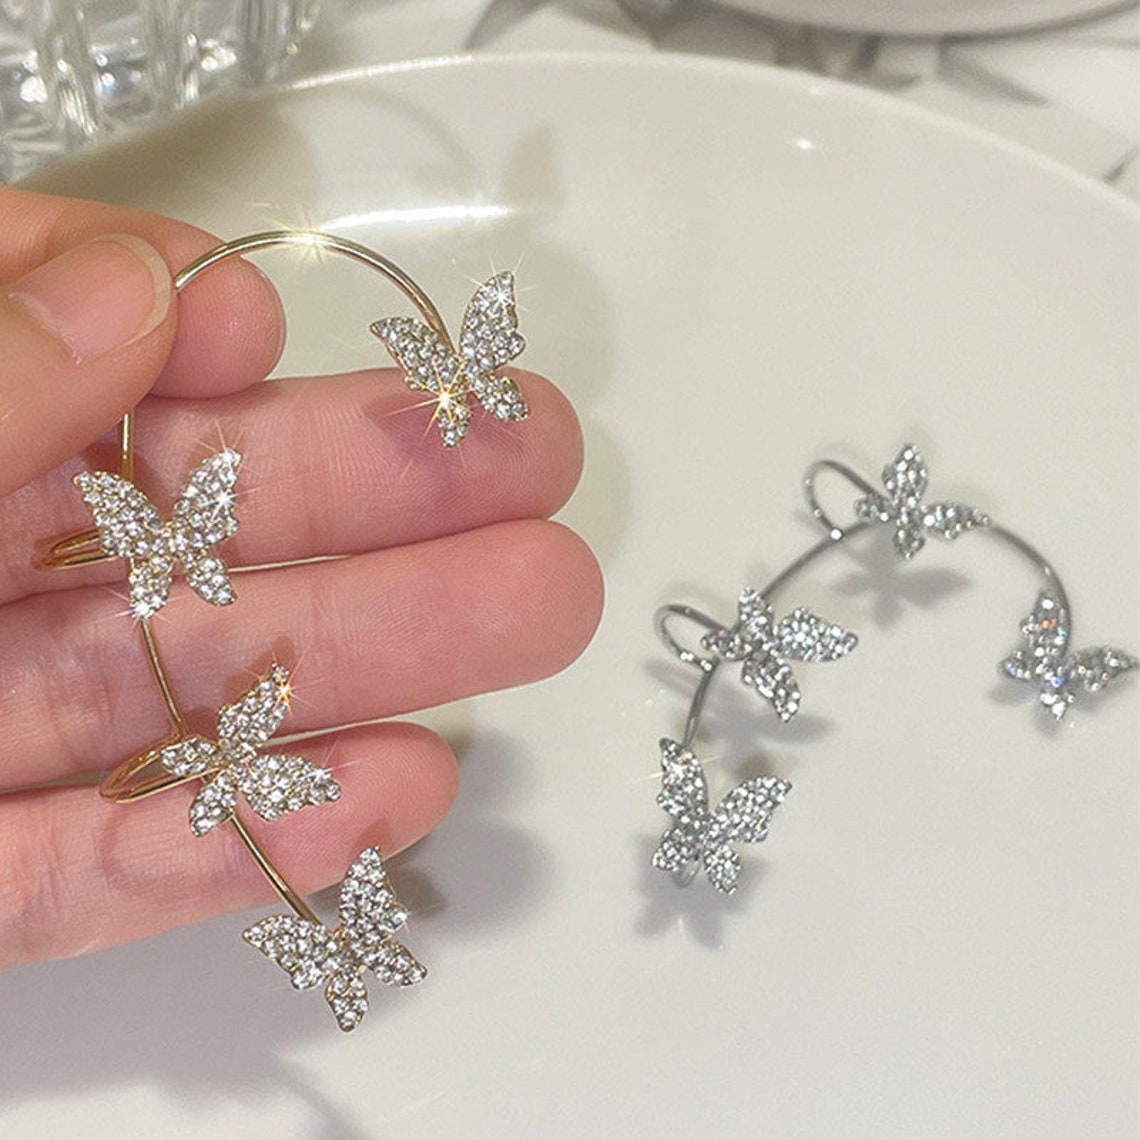 Clip-On Earrings for the Bride